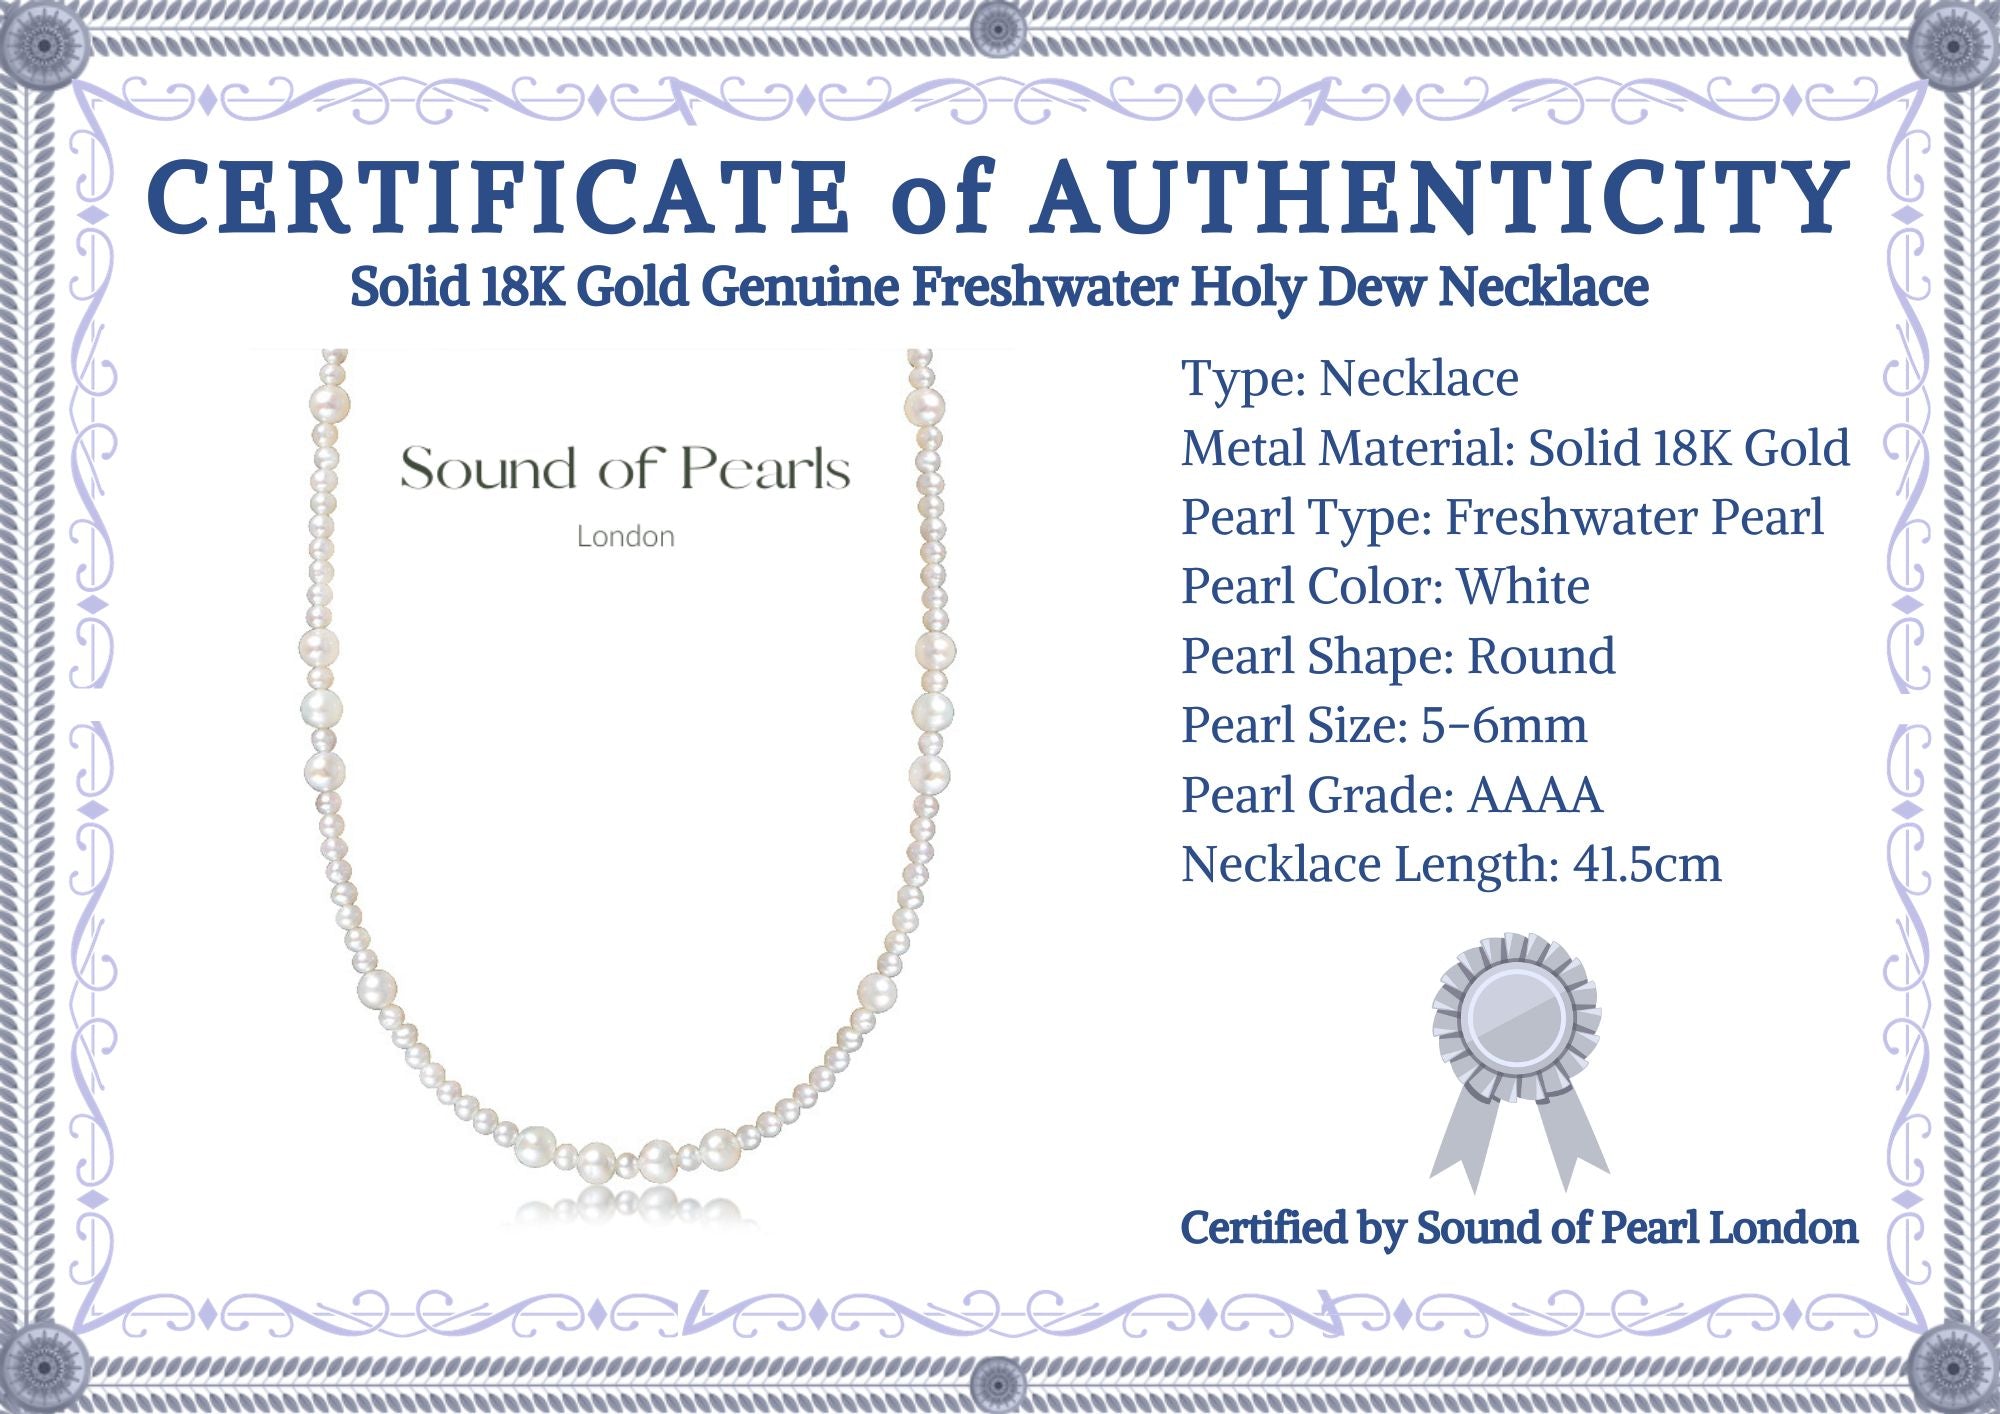 Solid 18K Gold Genuine Freshwater Holy Dew Necklace